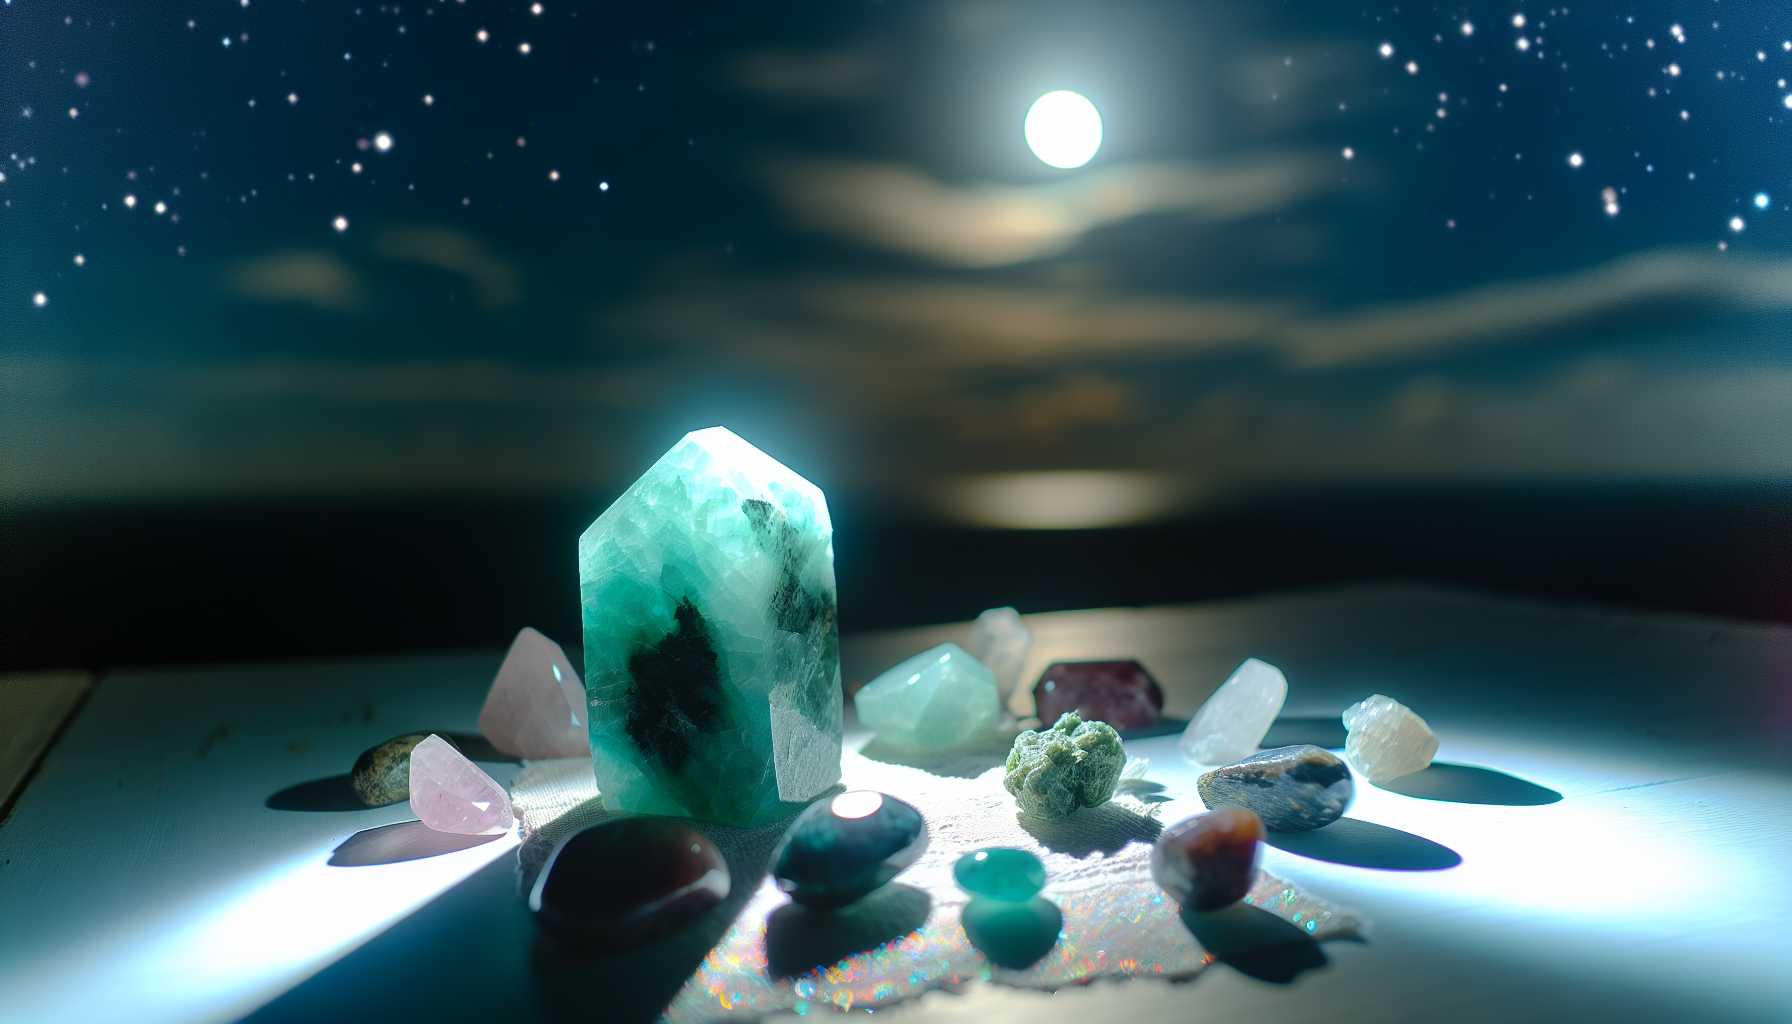 Amazonite crystal being charged under moonlight with a blurred background of other gemstones